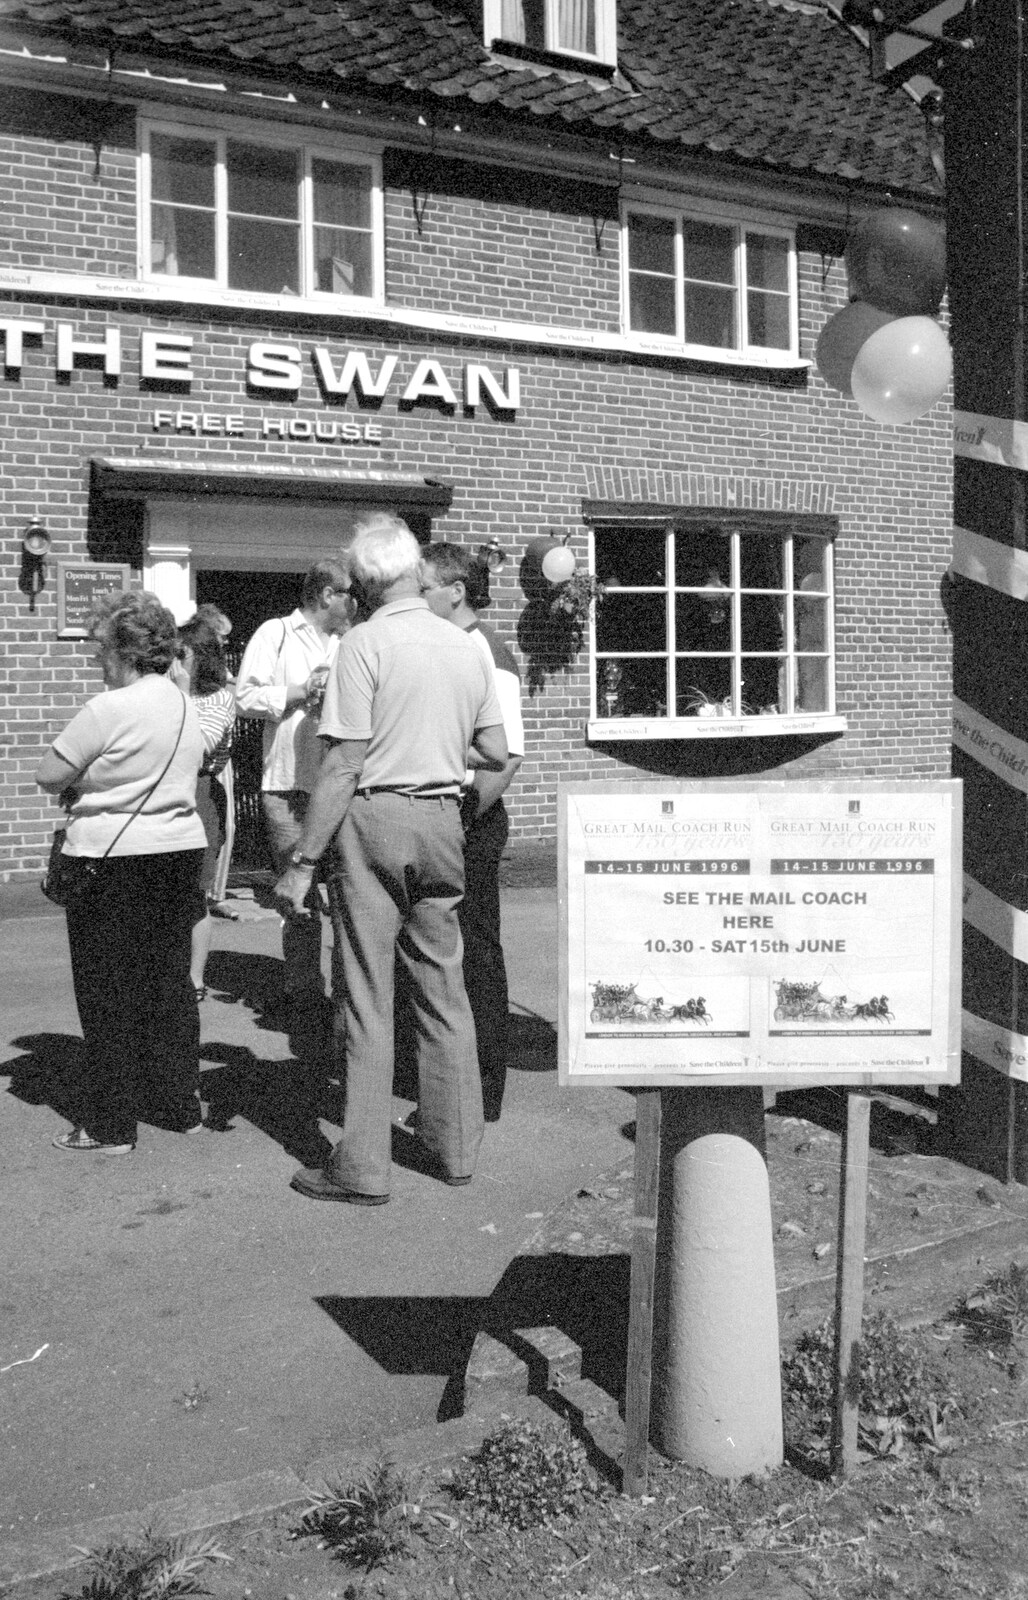 A poster advertising the Mail Run outside the Swan from The Norwich Union Mail Coach Run, The Swan Inn, Brome - 15th June 1996